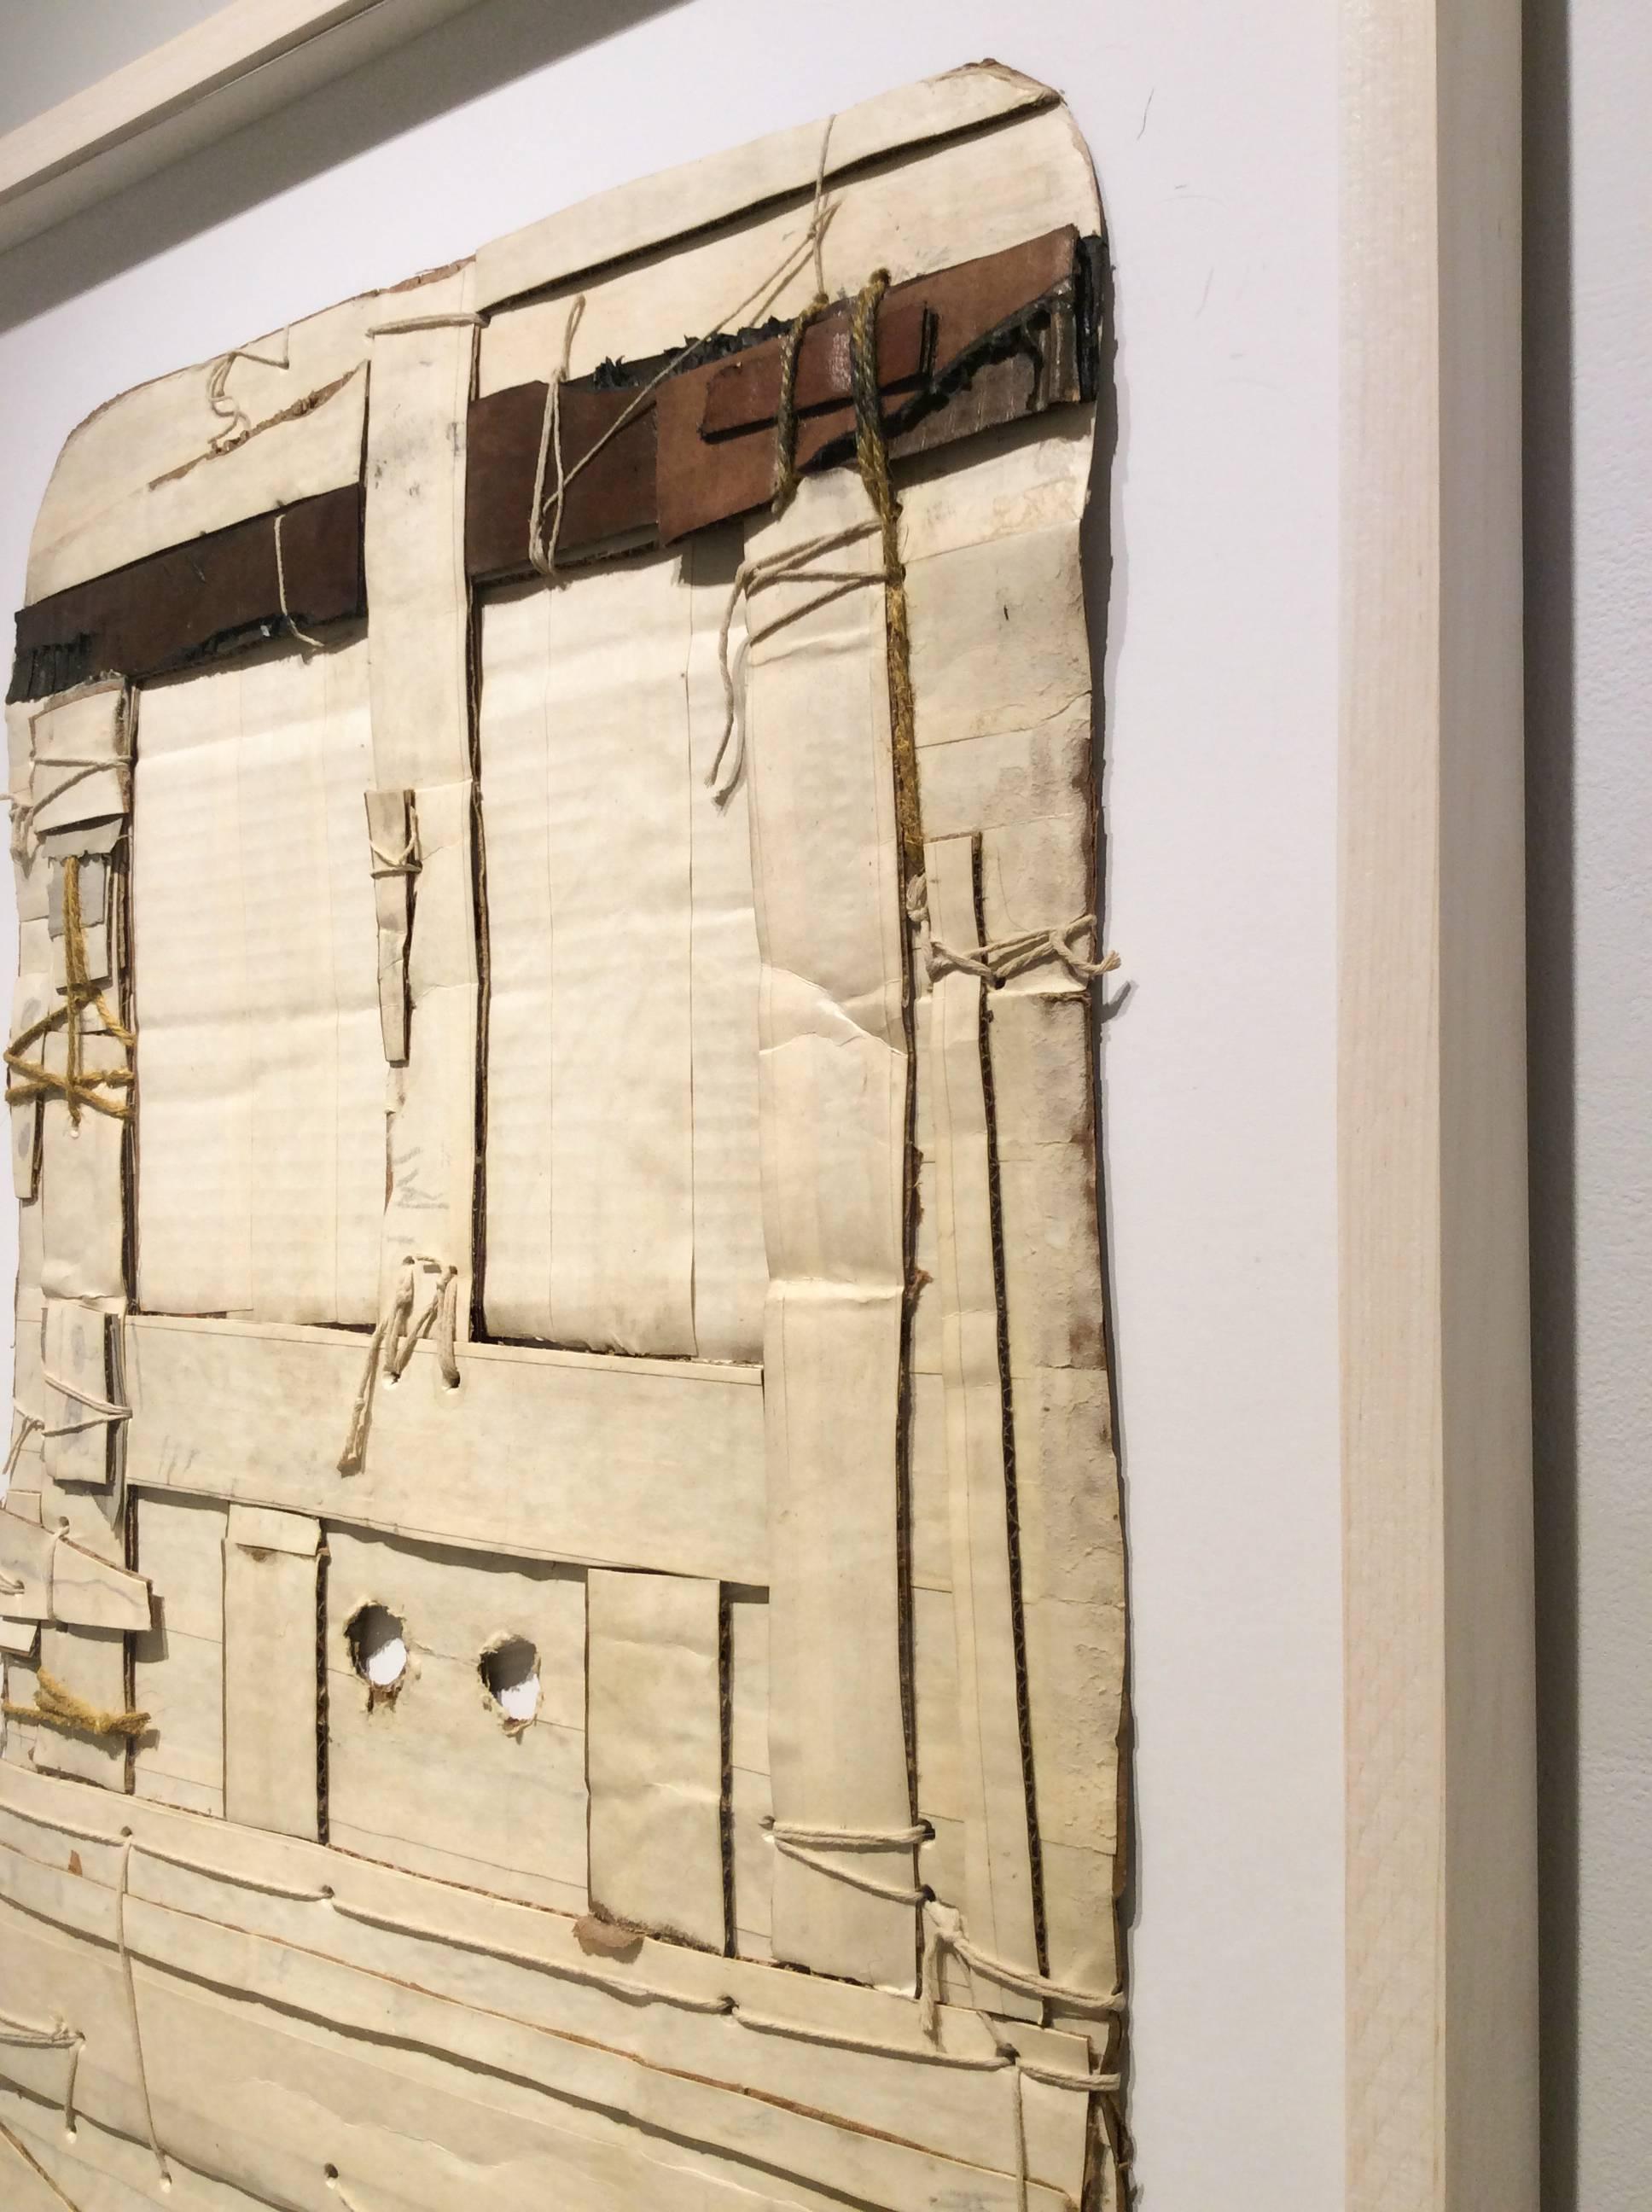 Upstate (White): Contemporary Mixed Media Cardboard Construction with String 1